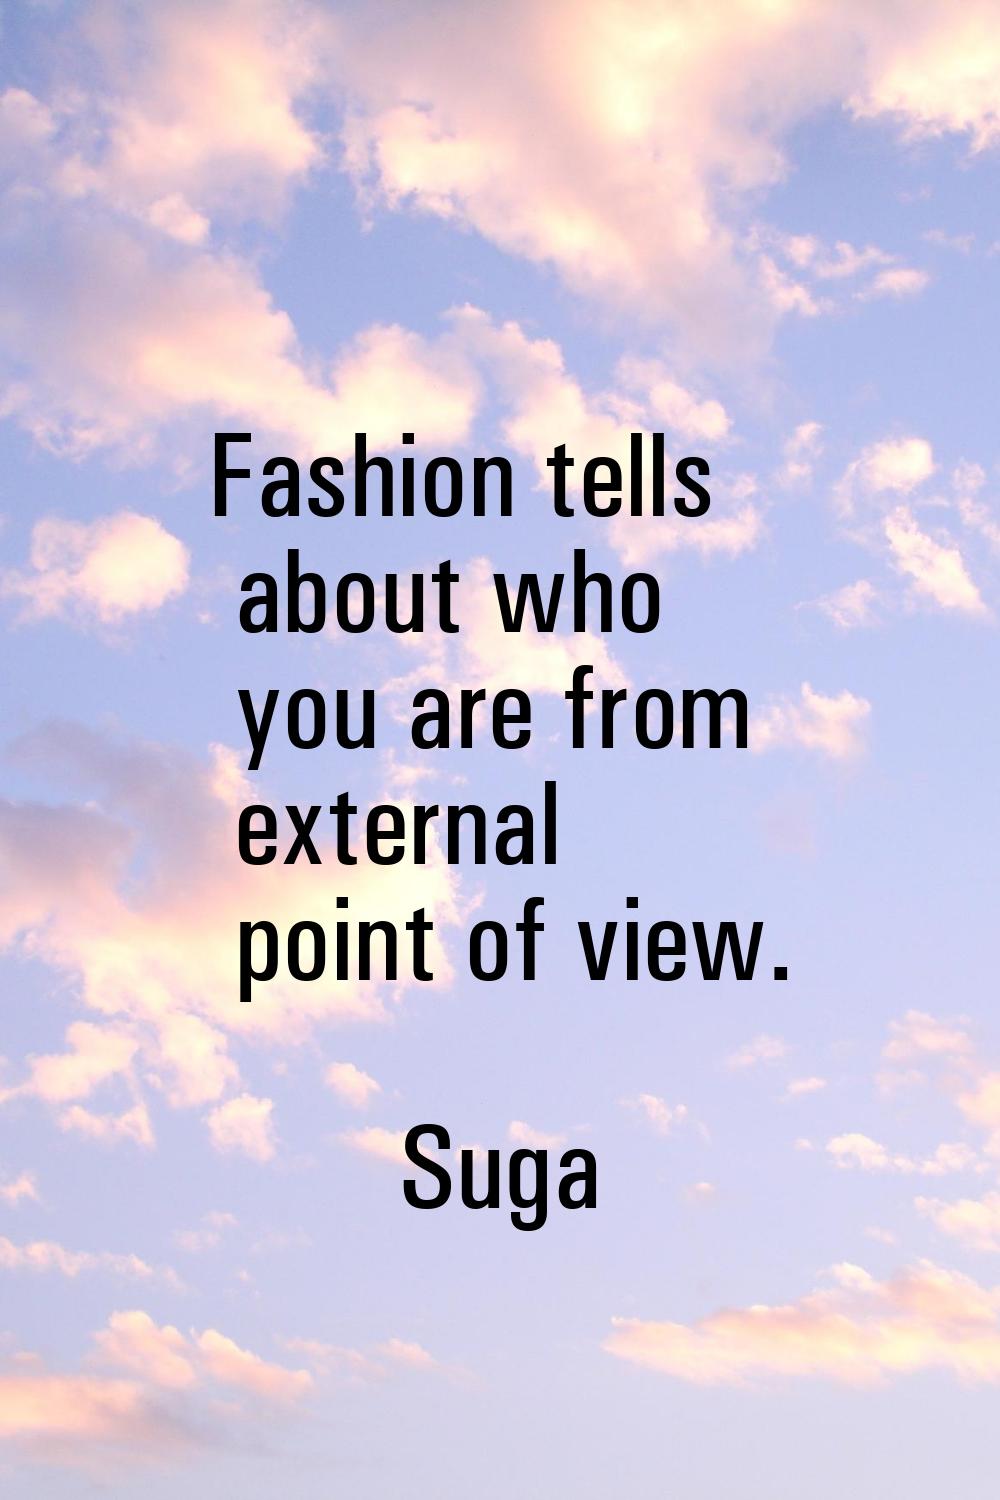 Fashion tells about who you are from external point of view.